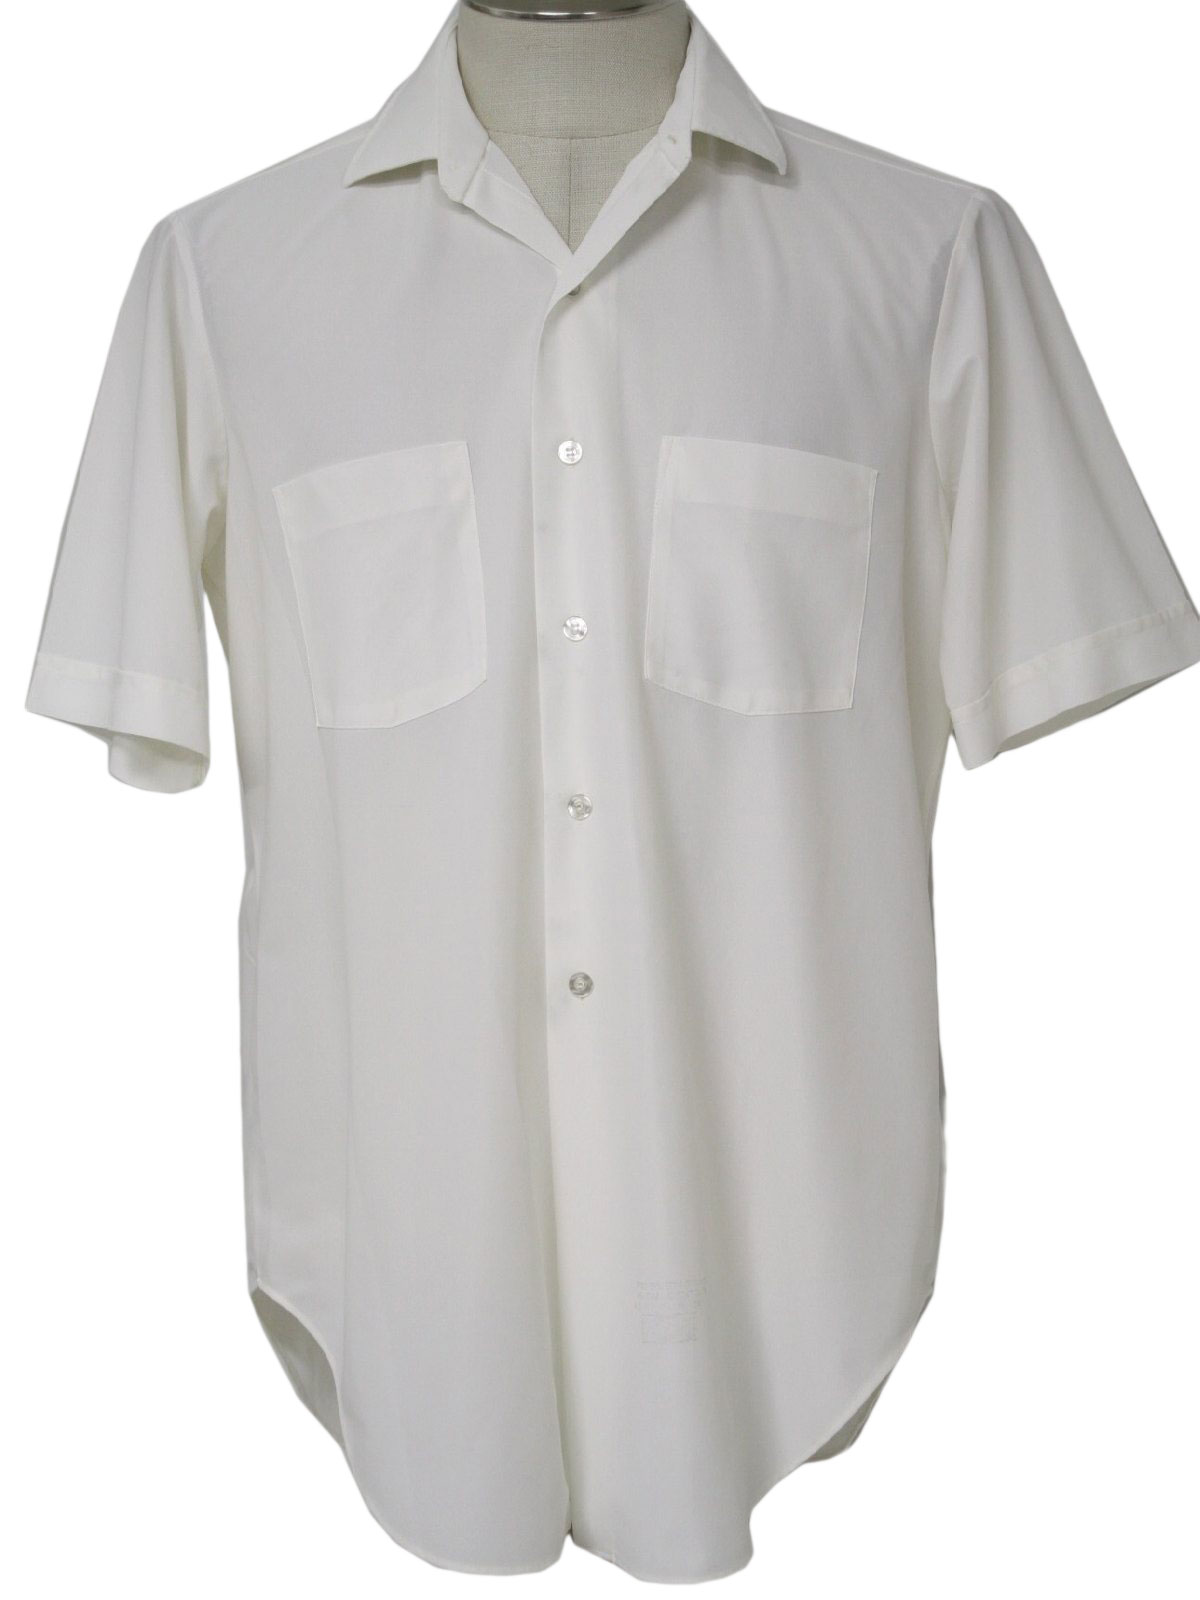 Or Comments Nylon Mens Shirts 92